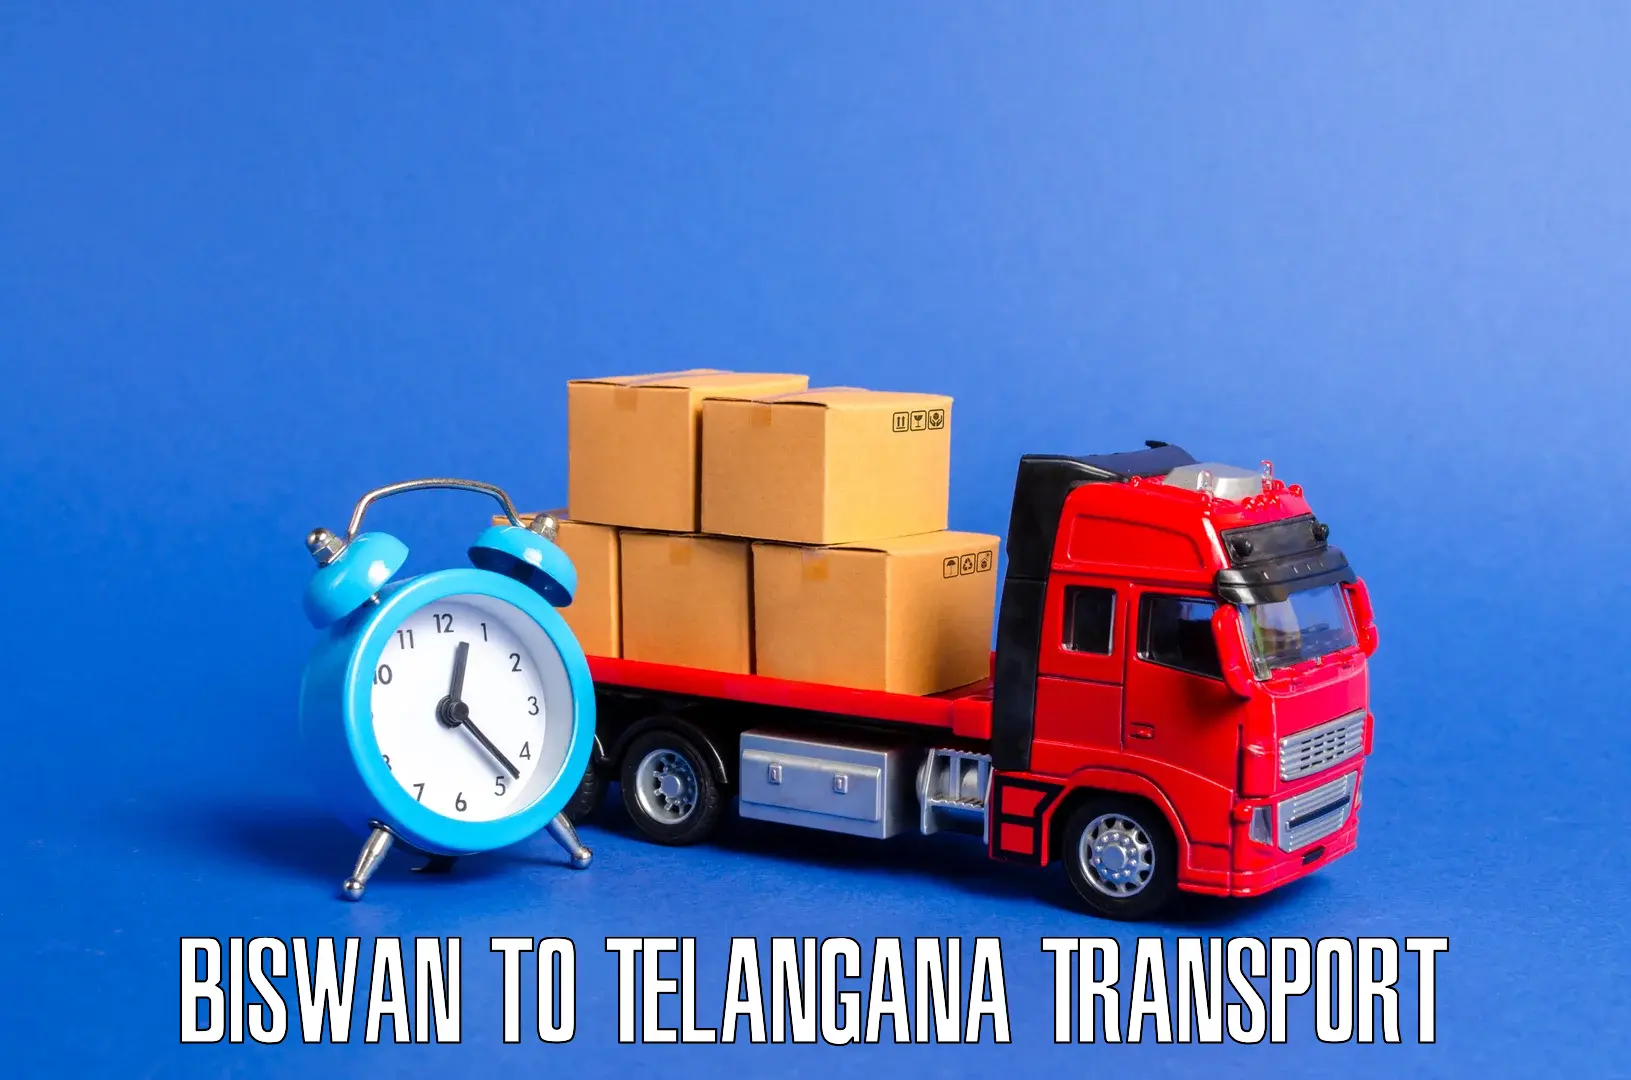 Nearby transport service Biswan to Vemulawada